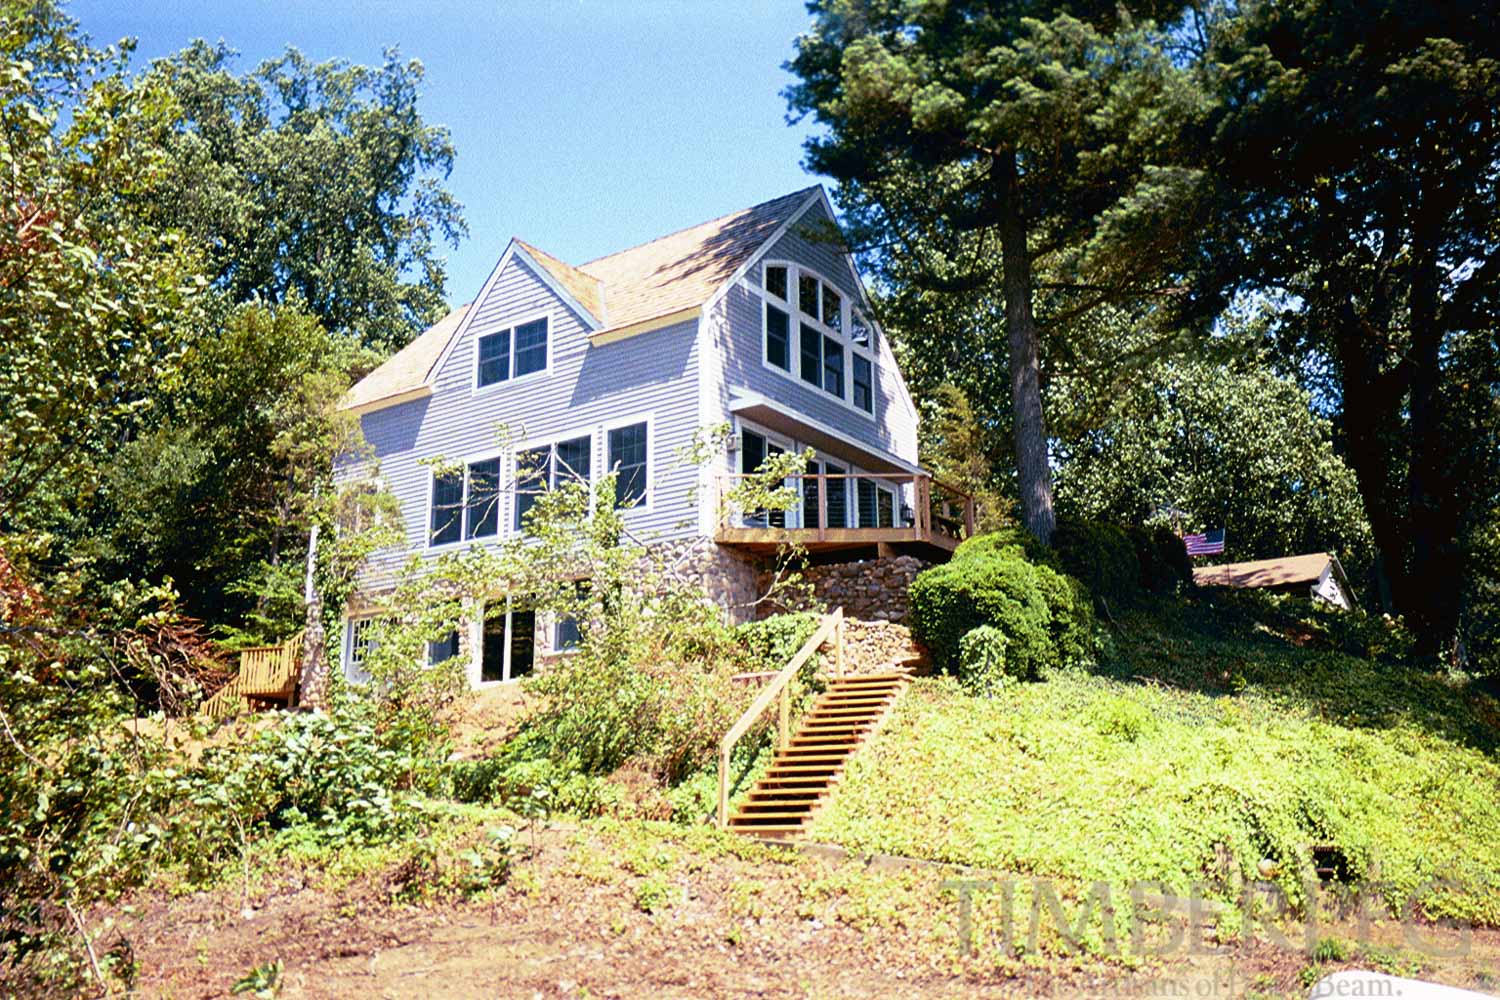 Sassafras River (5166) exterior back view with staircase leading uphill